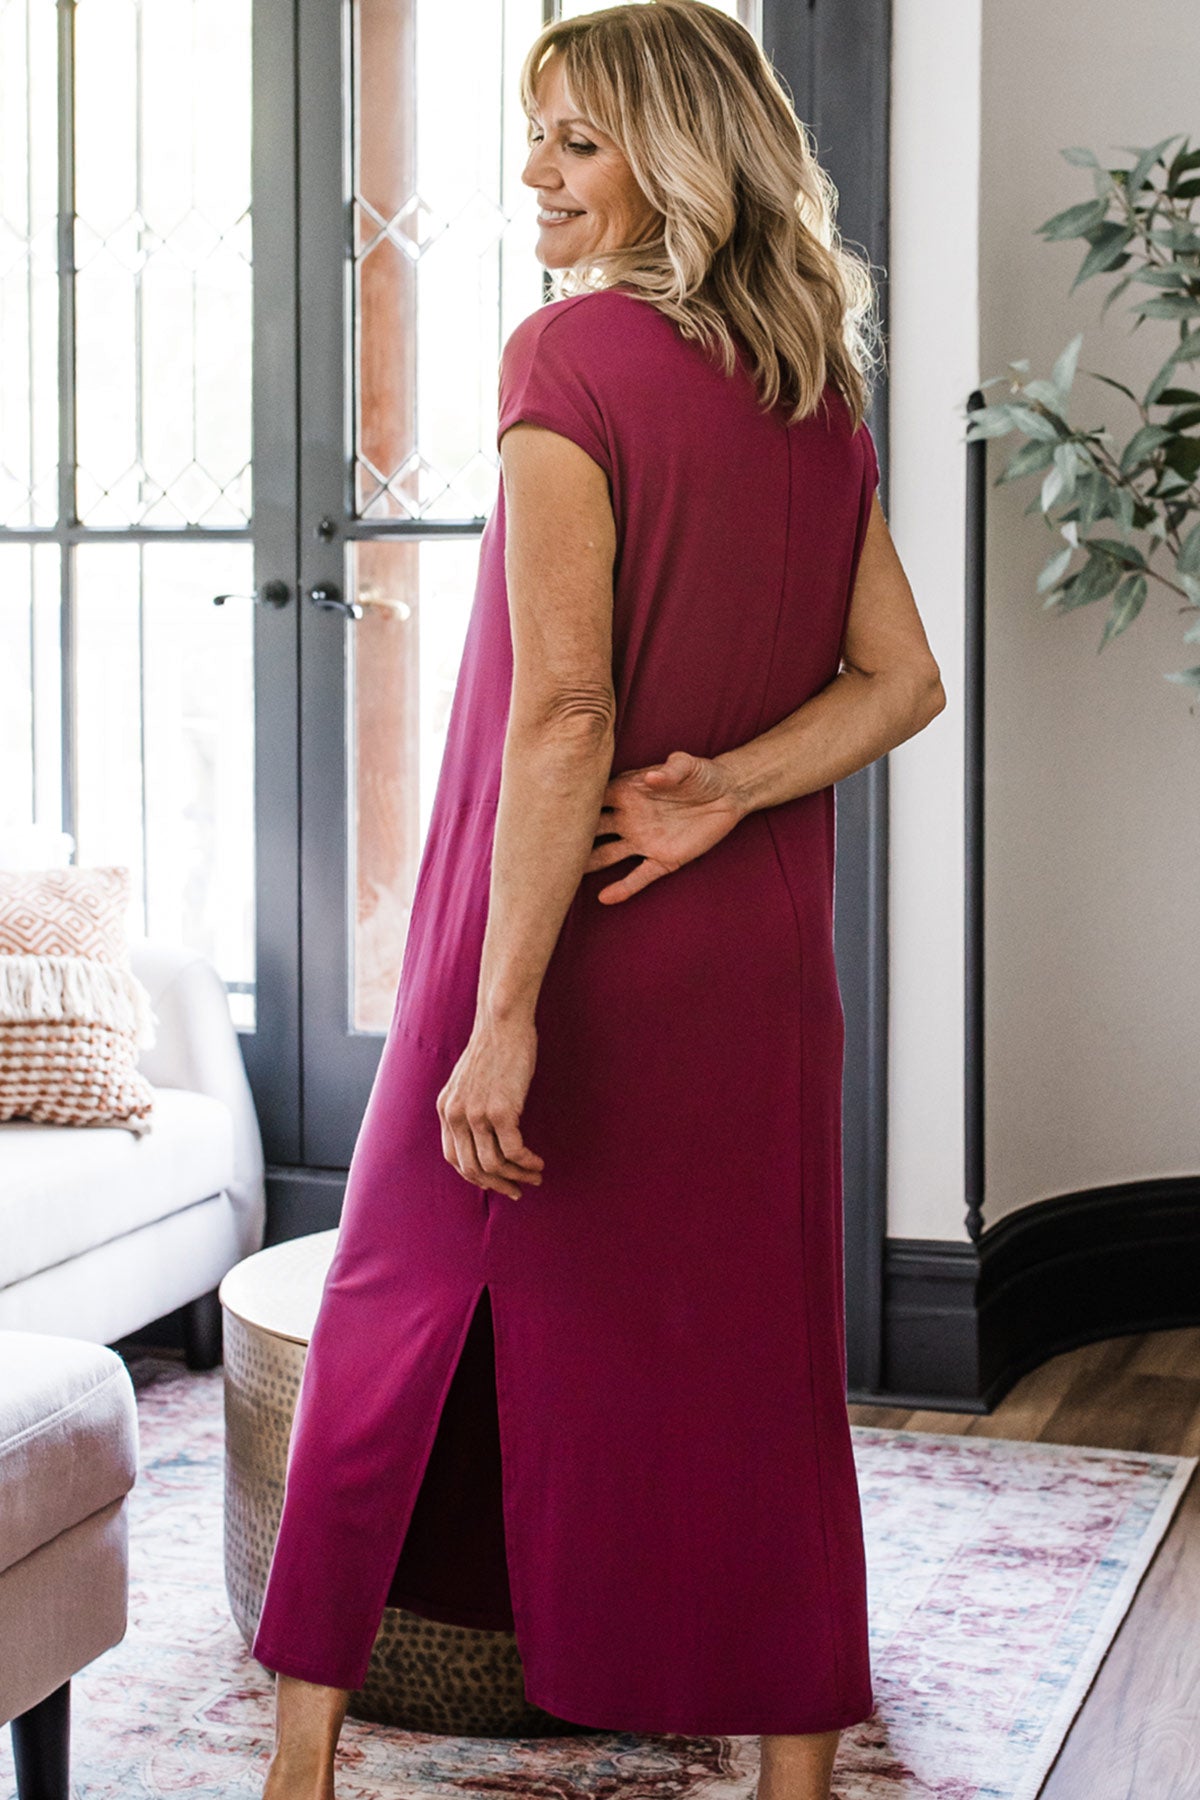 A woman standing facing away from the camera with her arms behind her back while lsmiling back over her shoulder, wearing Yala Sloane V-Neck Cap Sleeve Bamboo Maxi Dress in Boysenberry